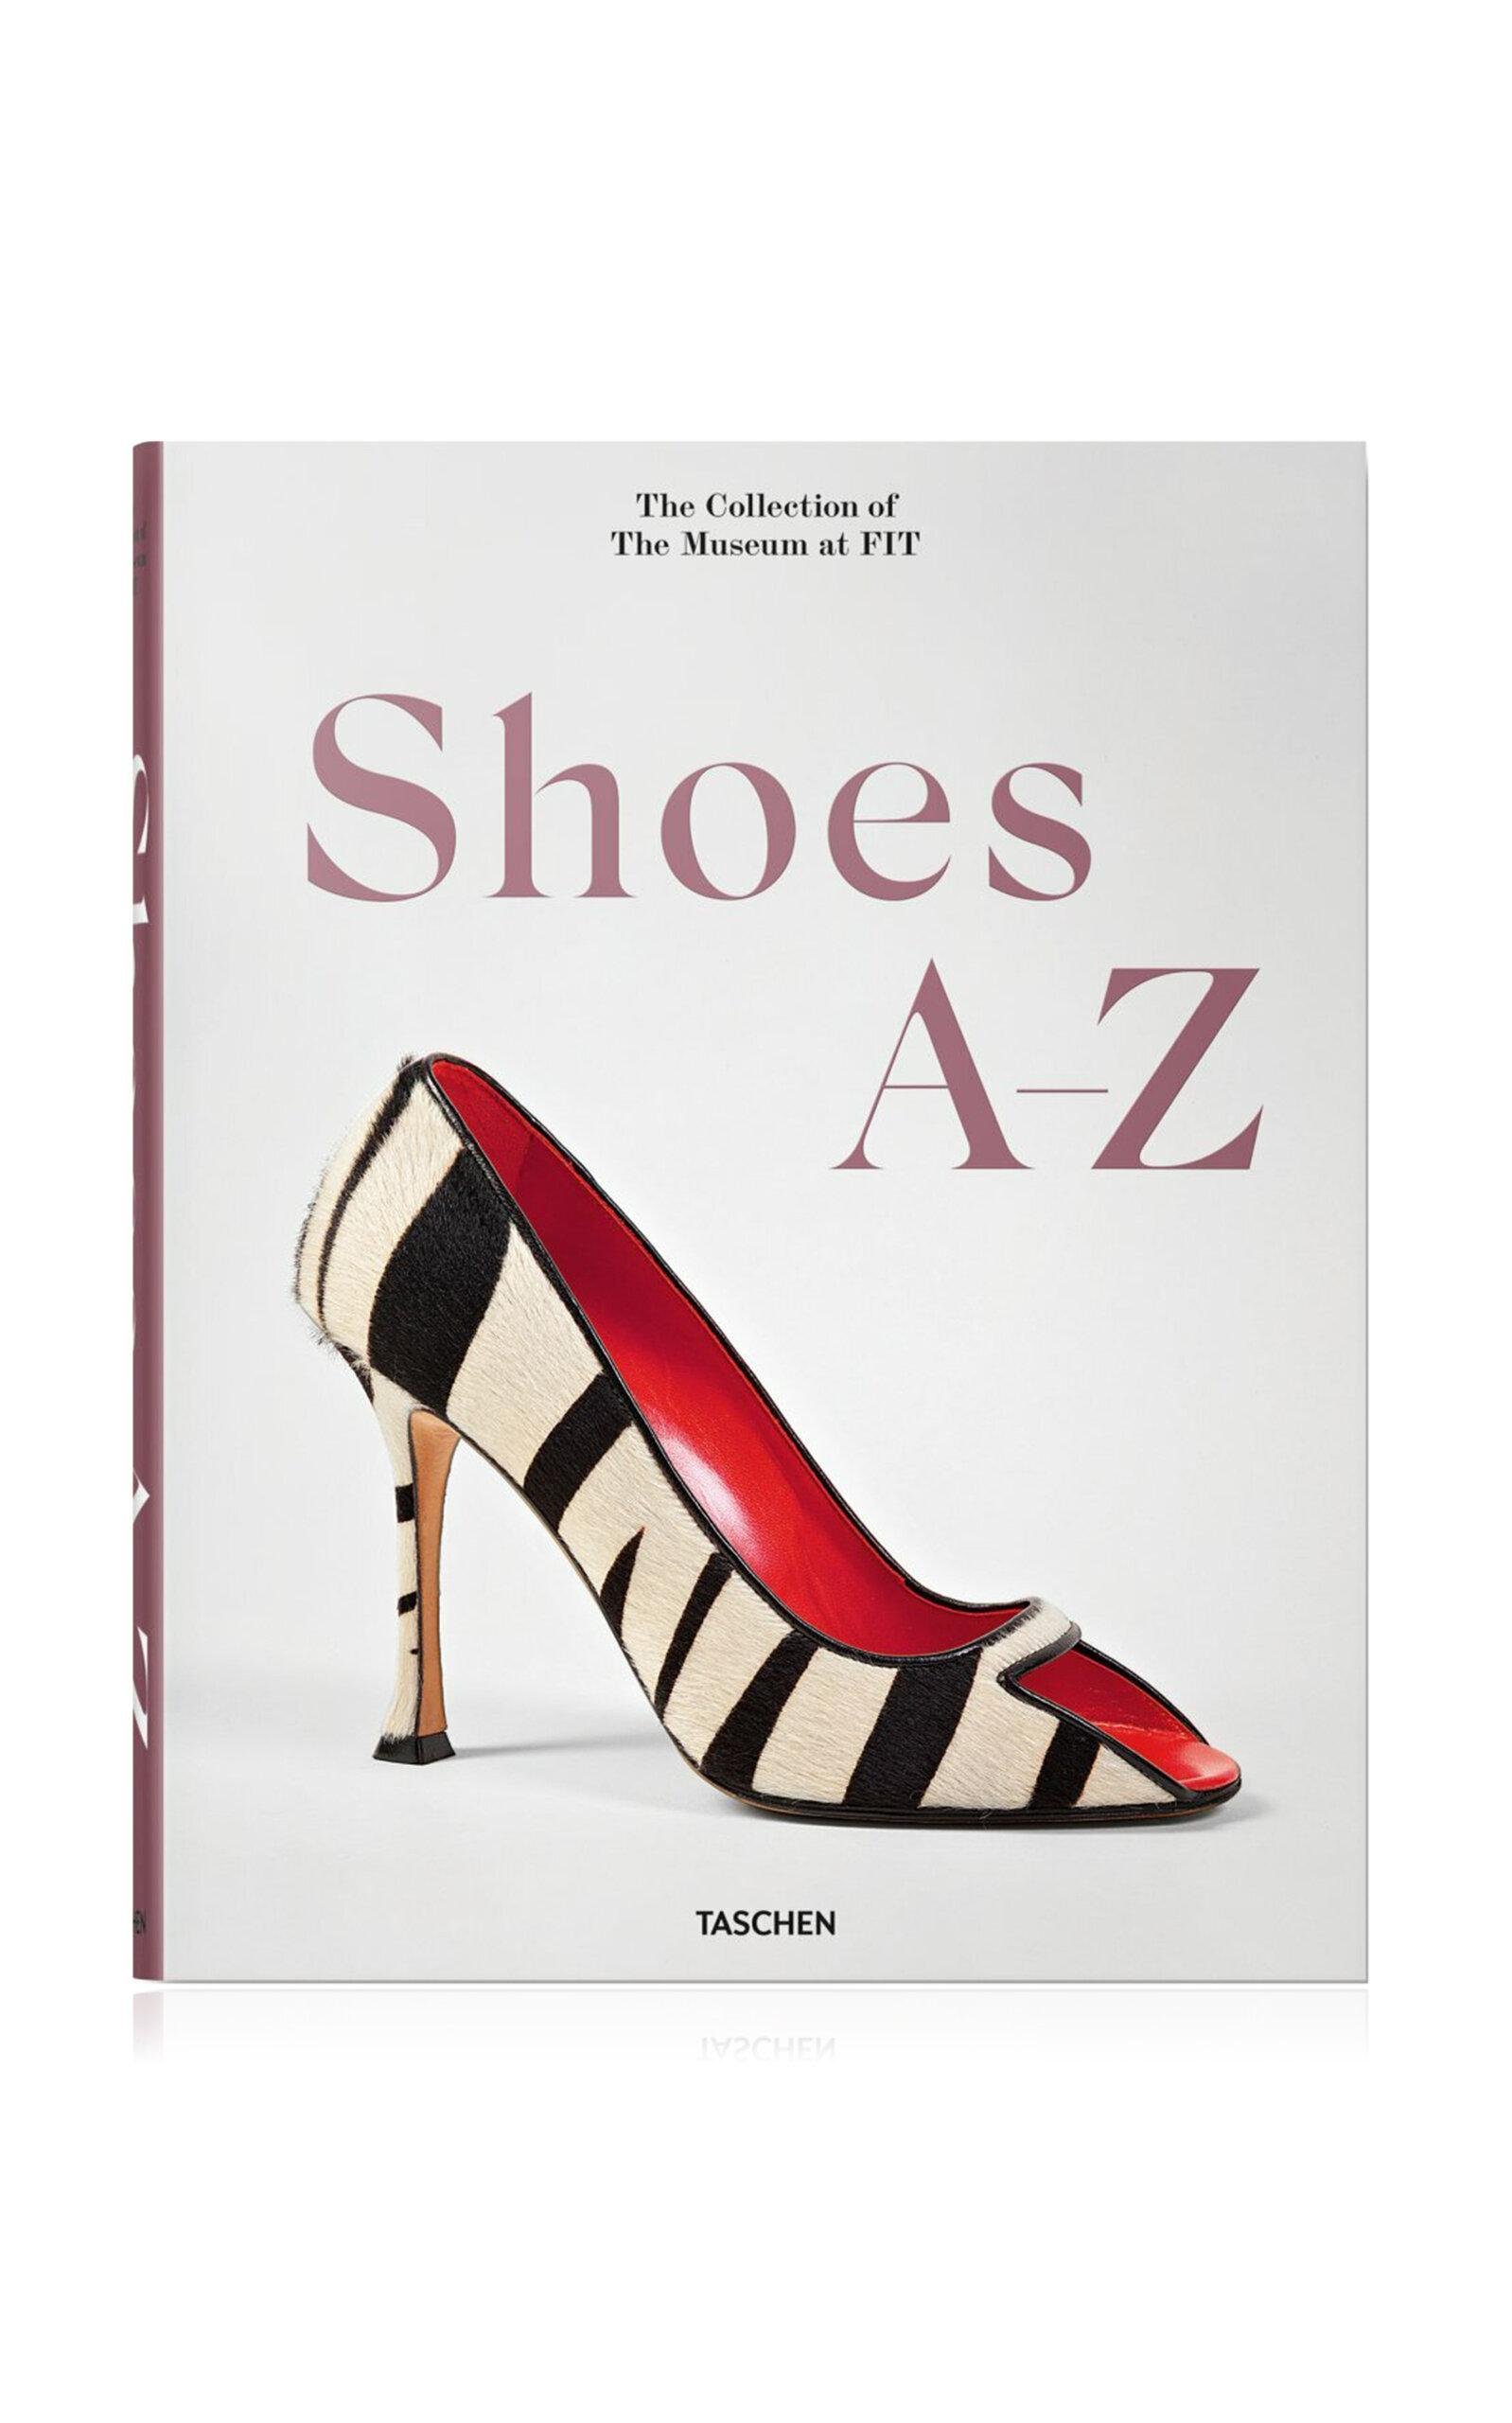 Taschen - Shoes A-Z: The Collection of The Museum at FIT Hardcover Book - Multi - Moda Operandi by TASCHEN